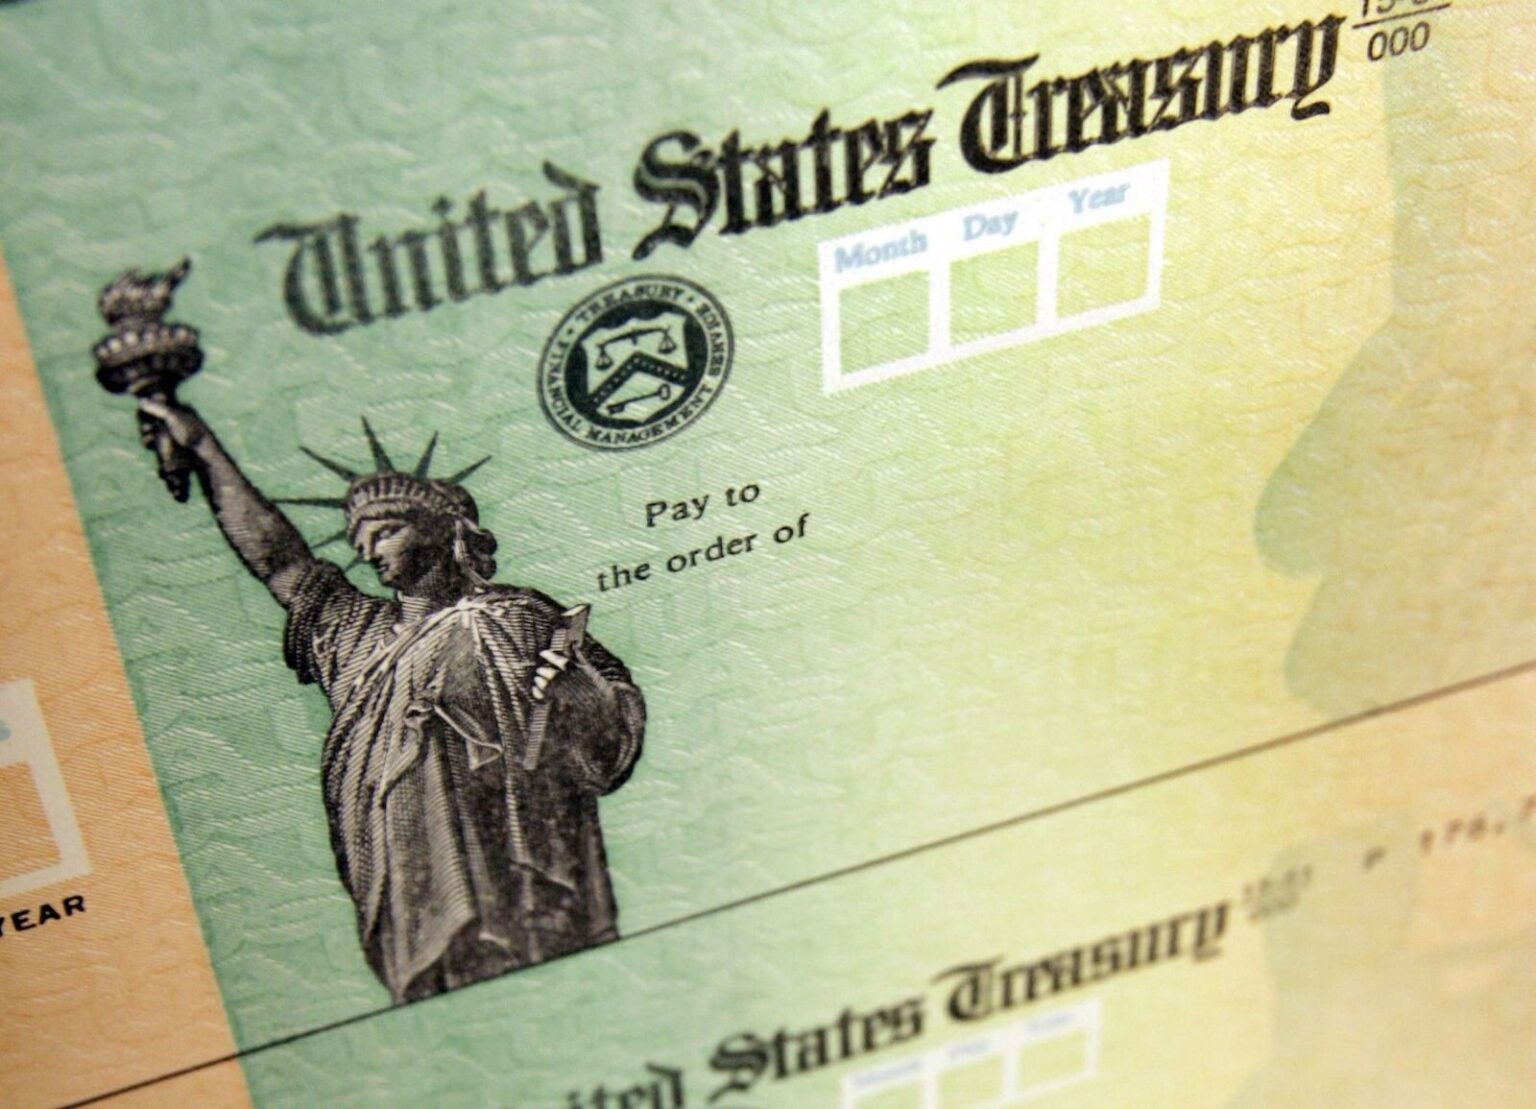 A third stimulus check is finally being issued, and you're likely waiting anxiously for it. Here's how you can check the status of your money.